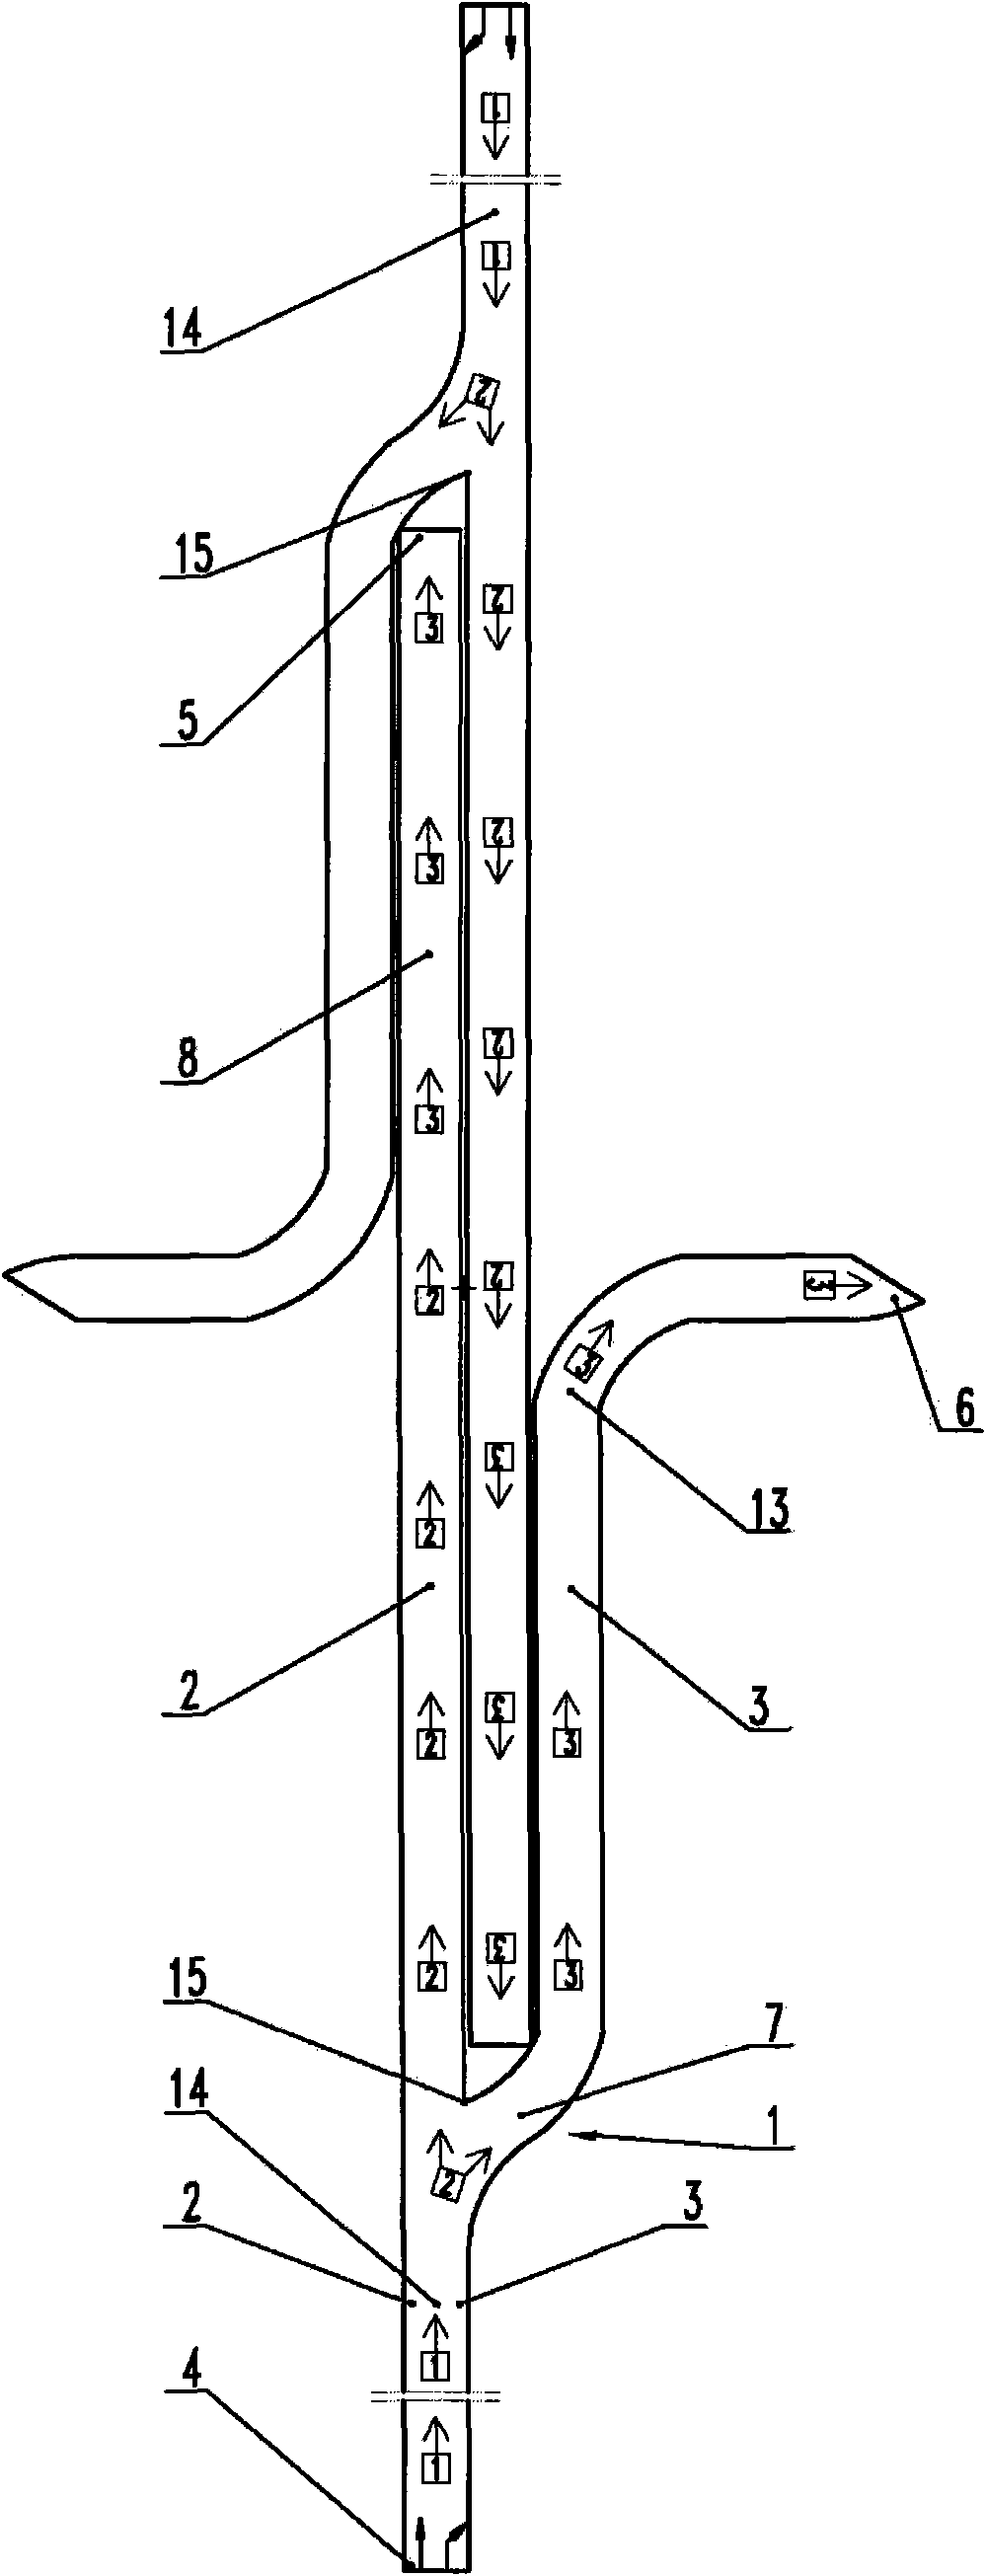 Combination bridge of two right-turn and straight-going "y"-shaped bifurcated bridges